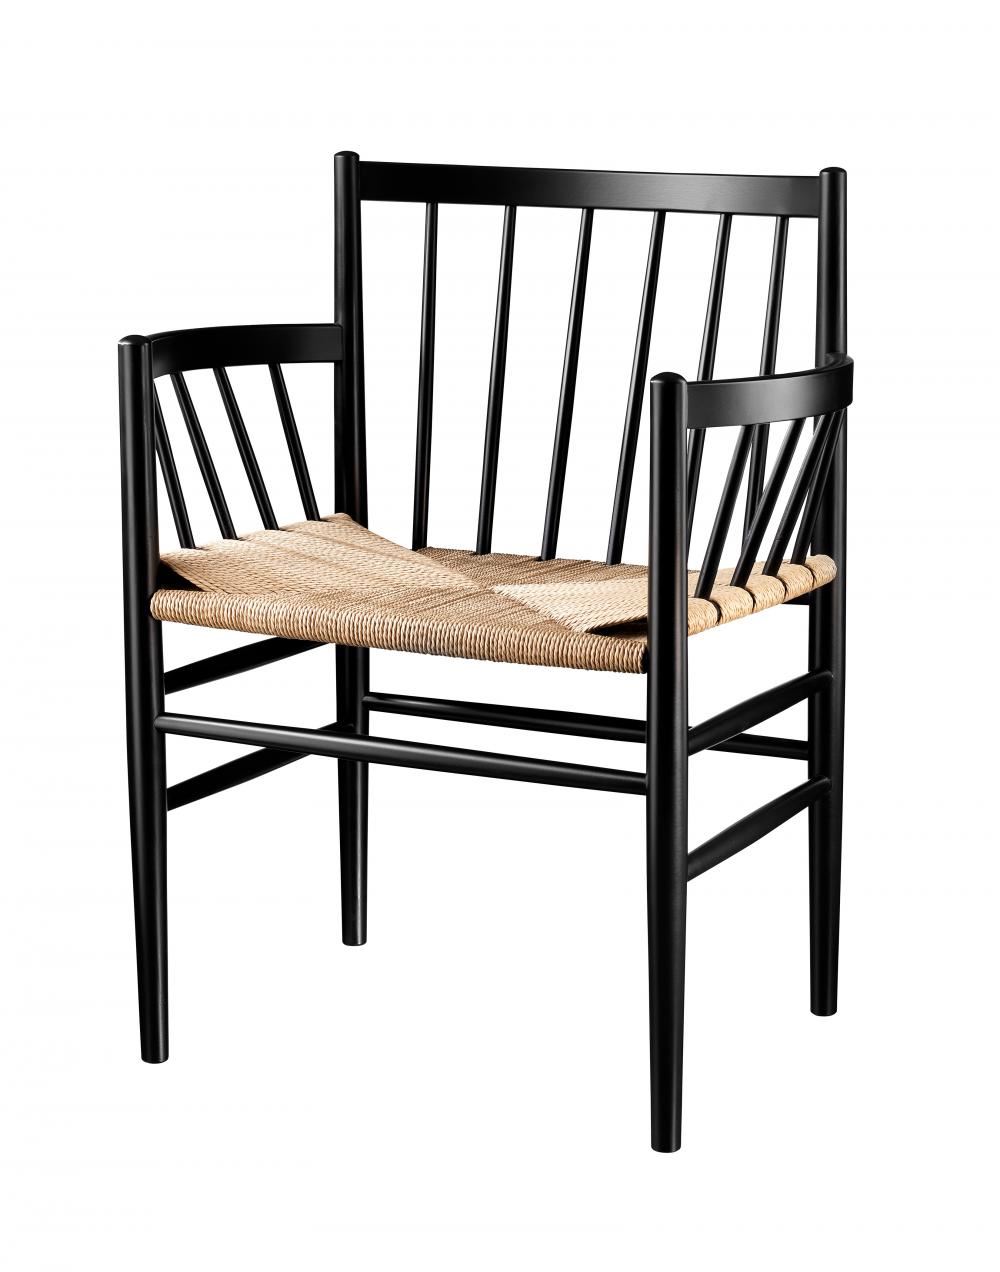 J81 Armchair Black Beech With Natural Woven Seat